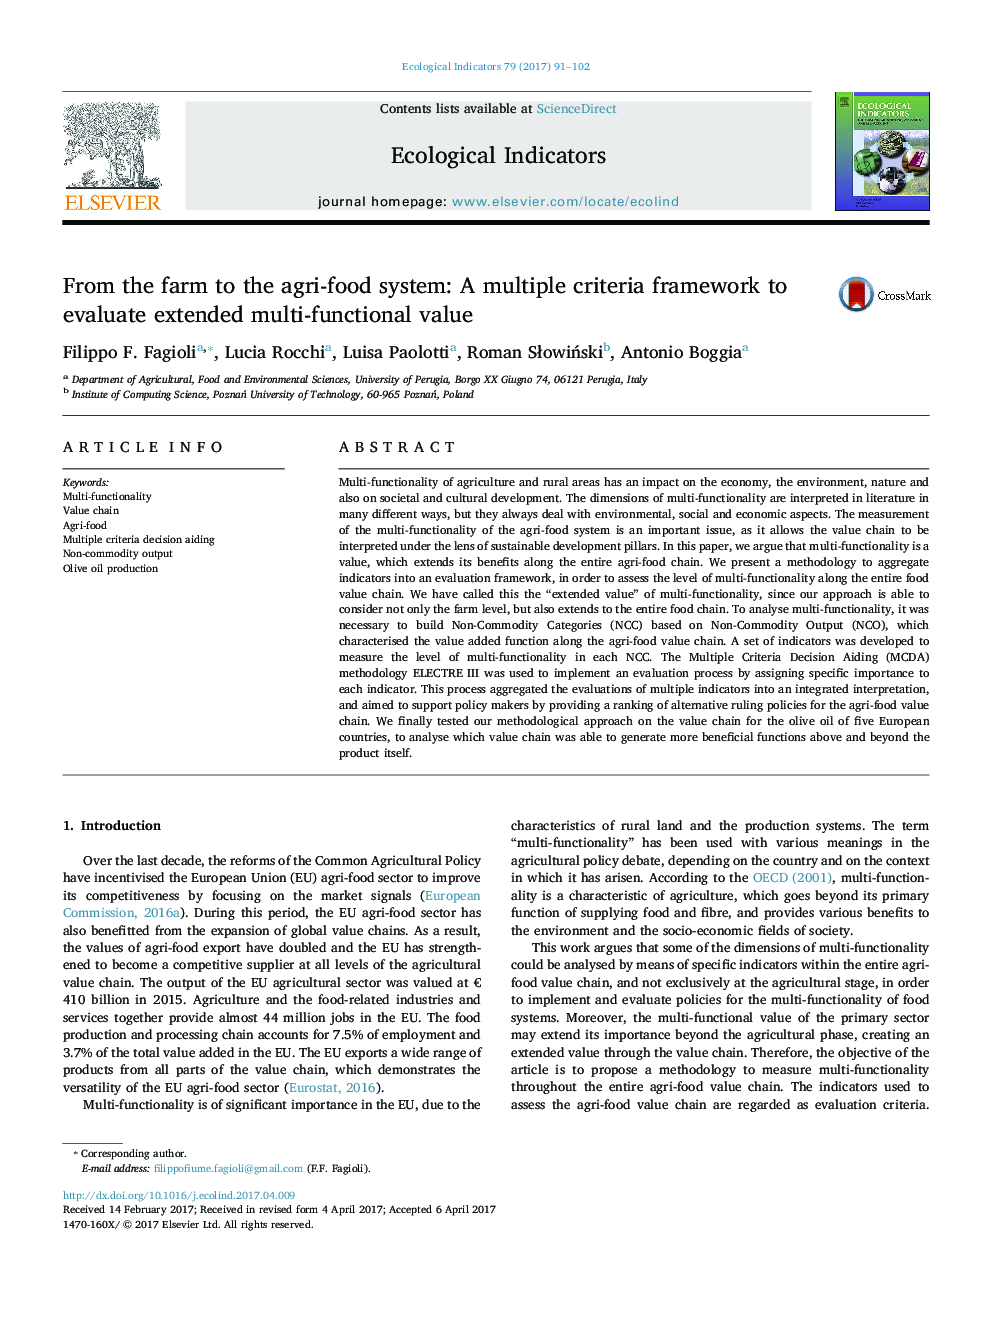 From the farm to the agri-food system: A multiple criteria framework to evaluate extended multi-functional value